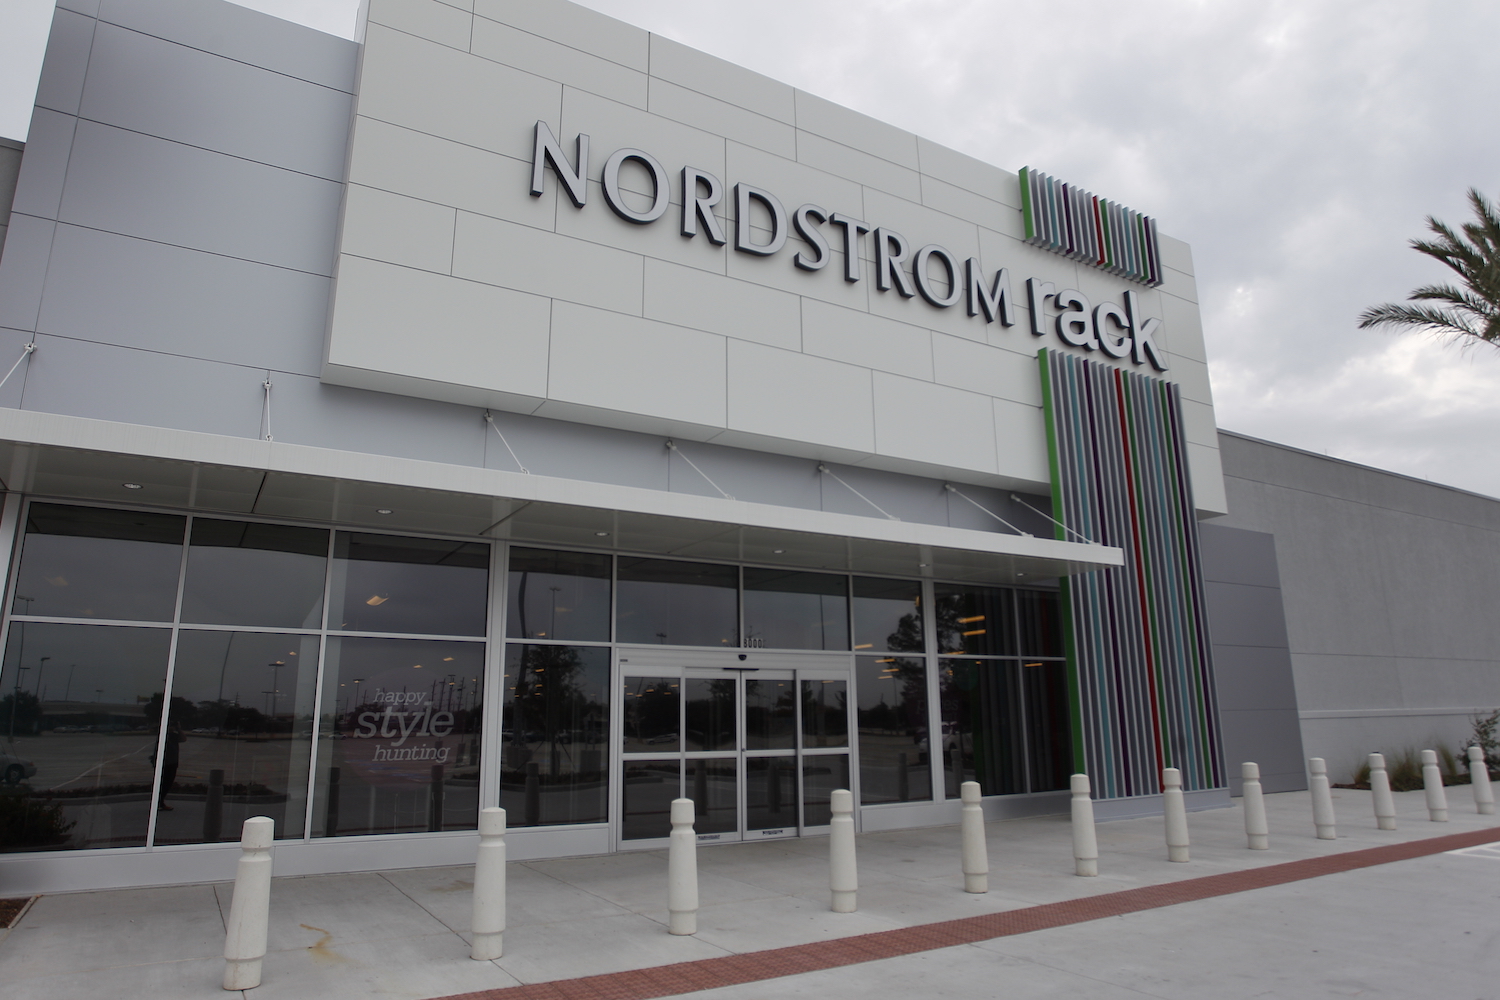 How To Check Your Nordstrom Rack Gift Card Balance